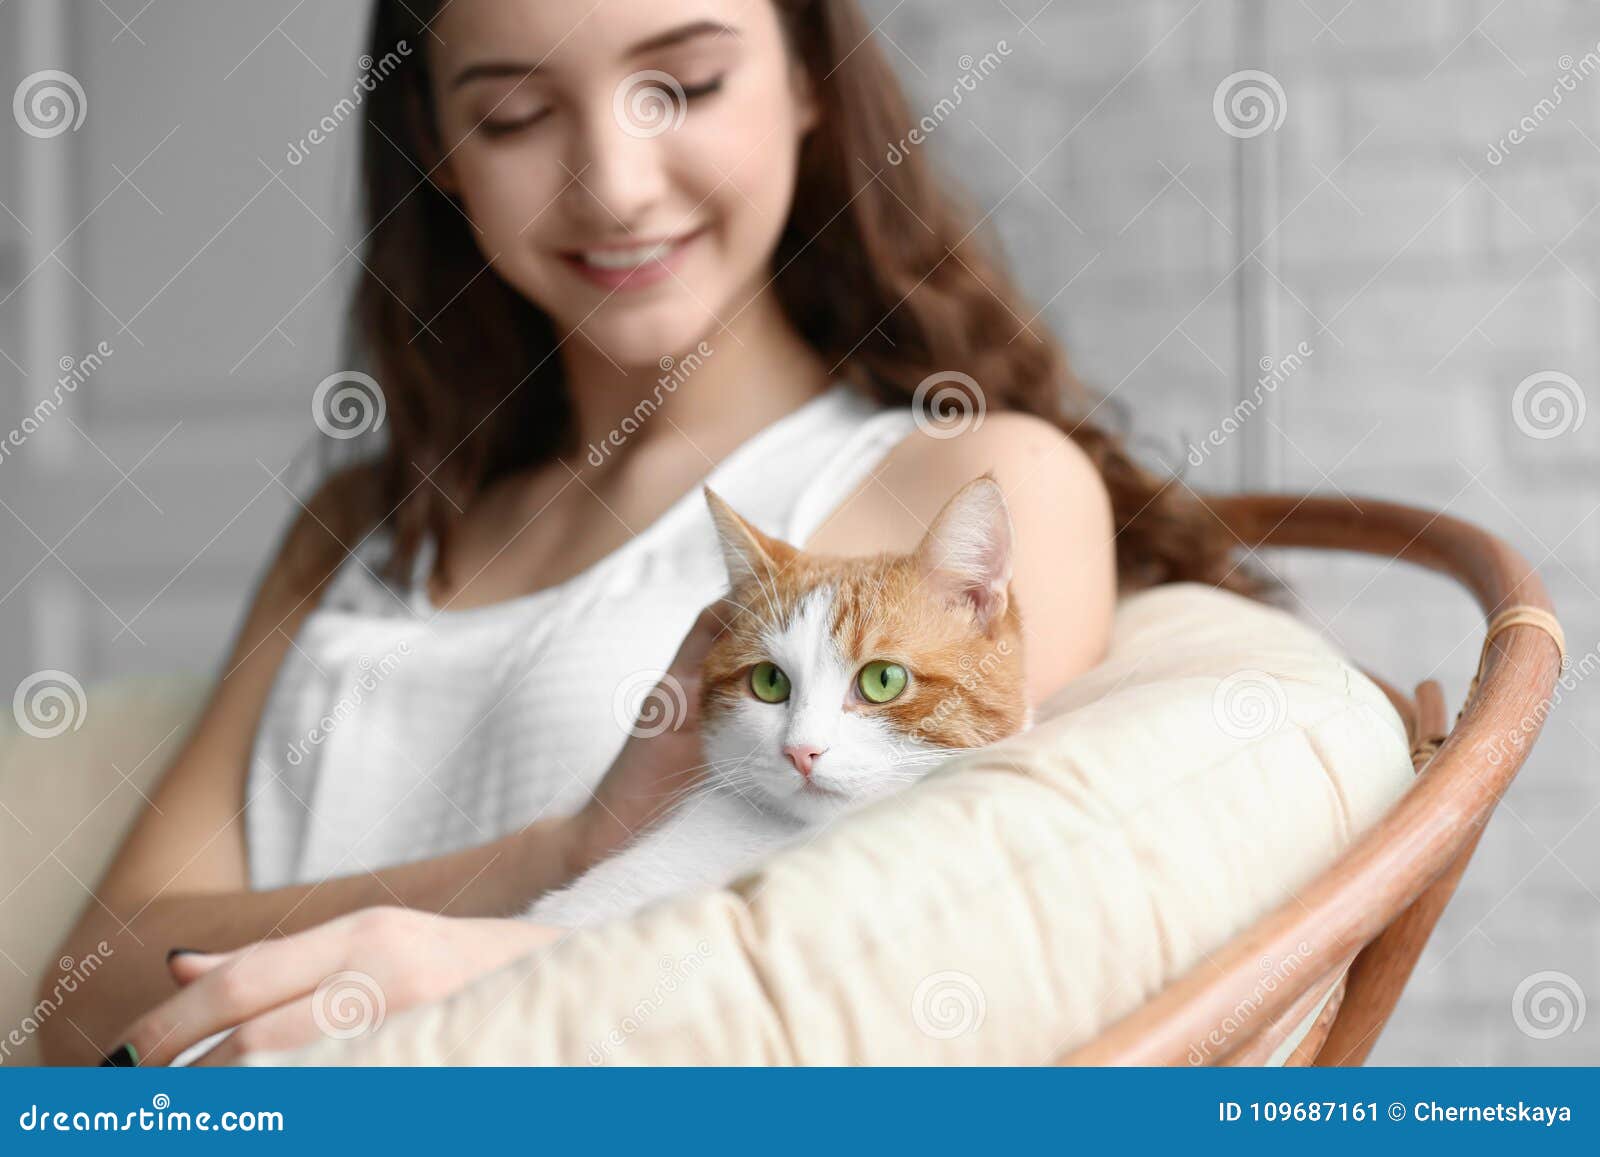 Beautiful Young Woman with Cute Cat in Armchair Stock Image - Image of ...